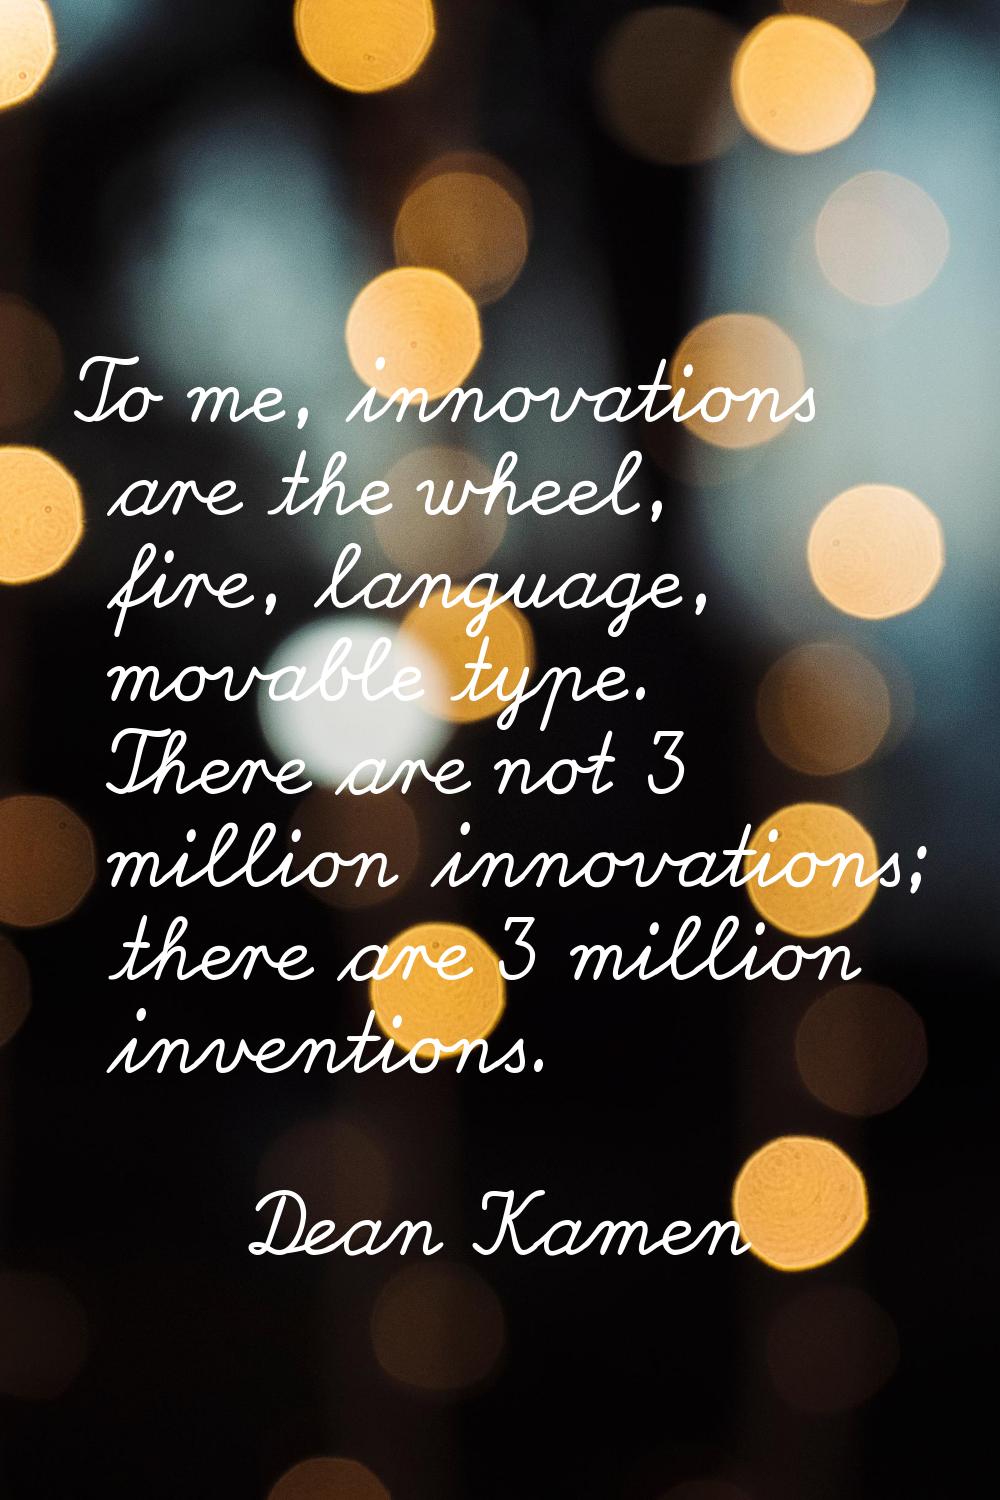 To me, innovations are the wheel, fire, language, movable type. There are not 3 million innovations